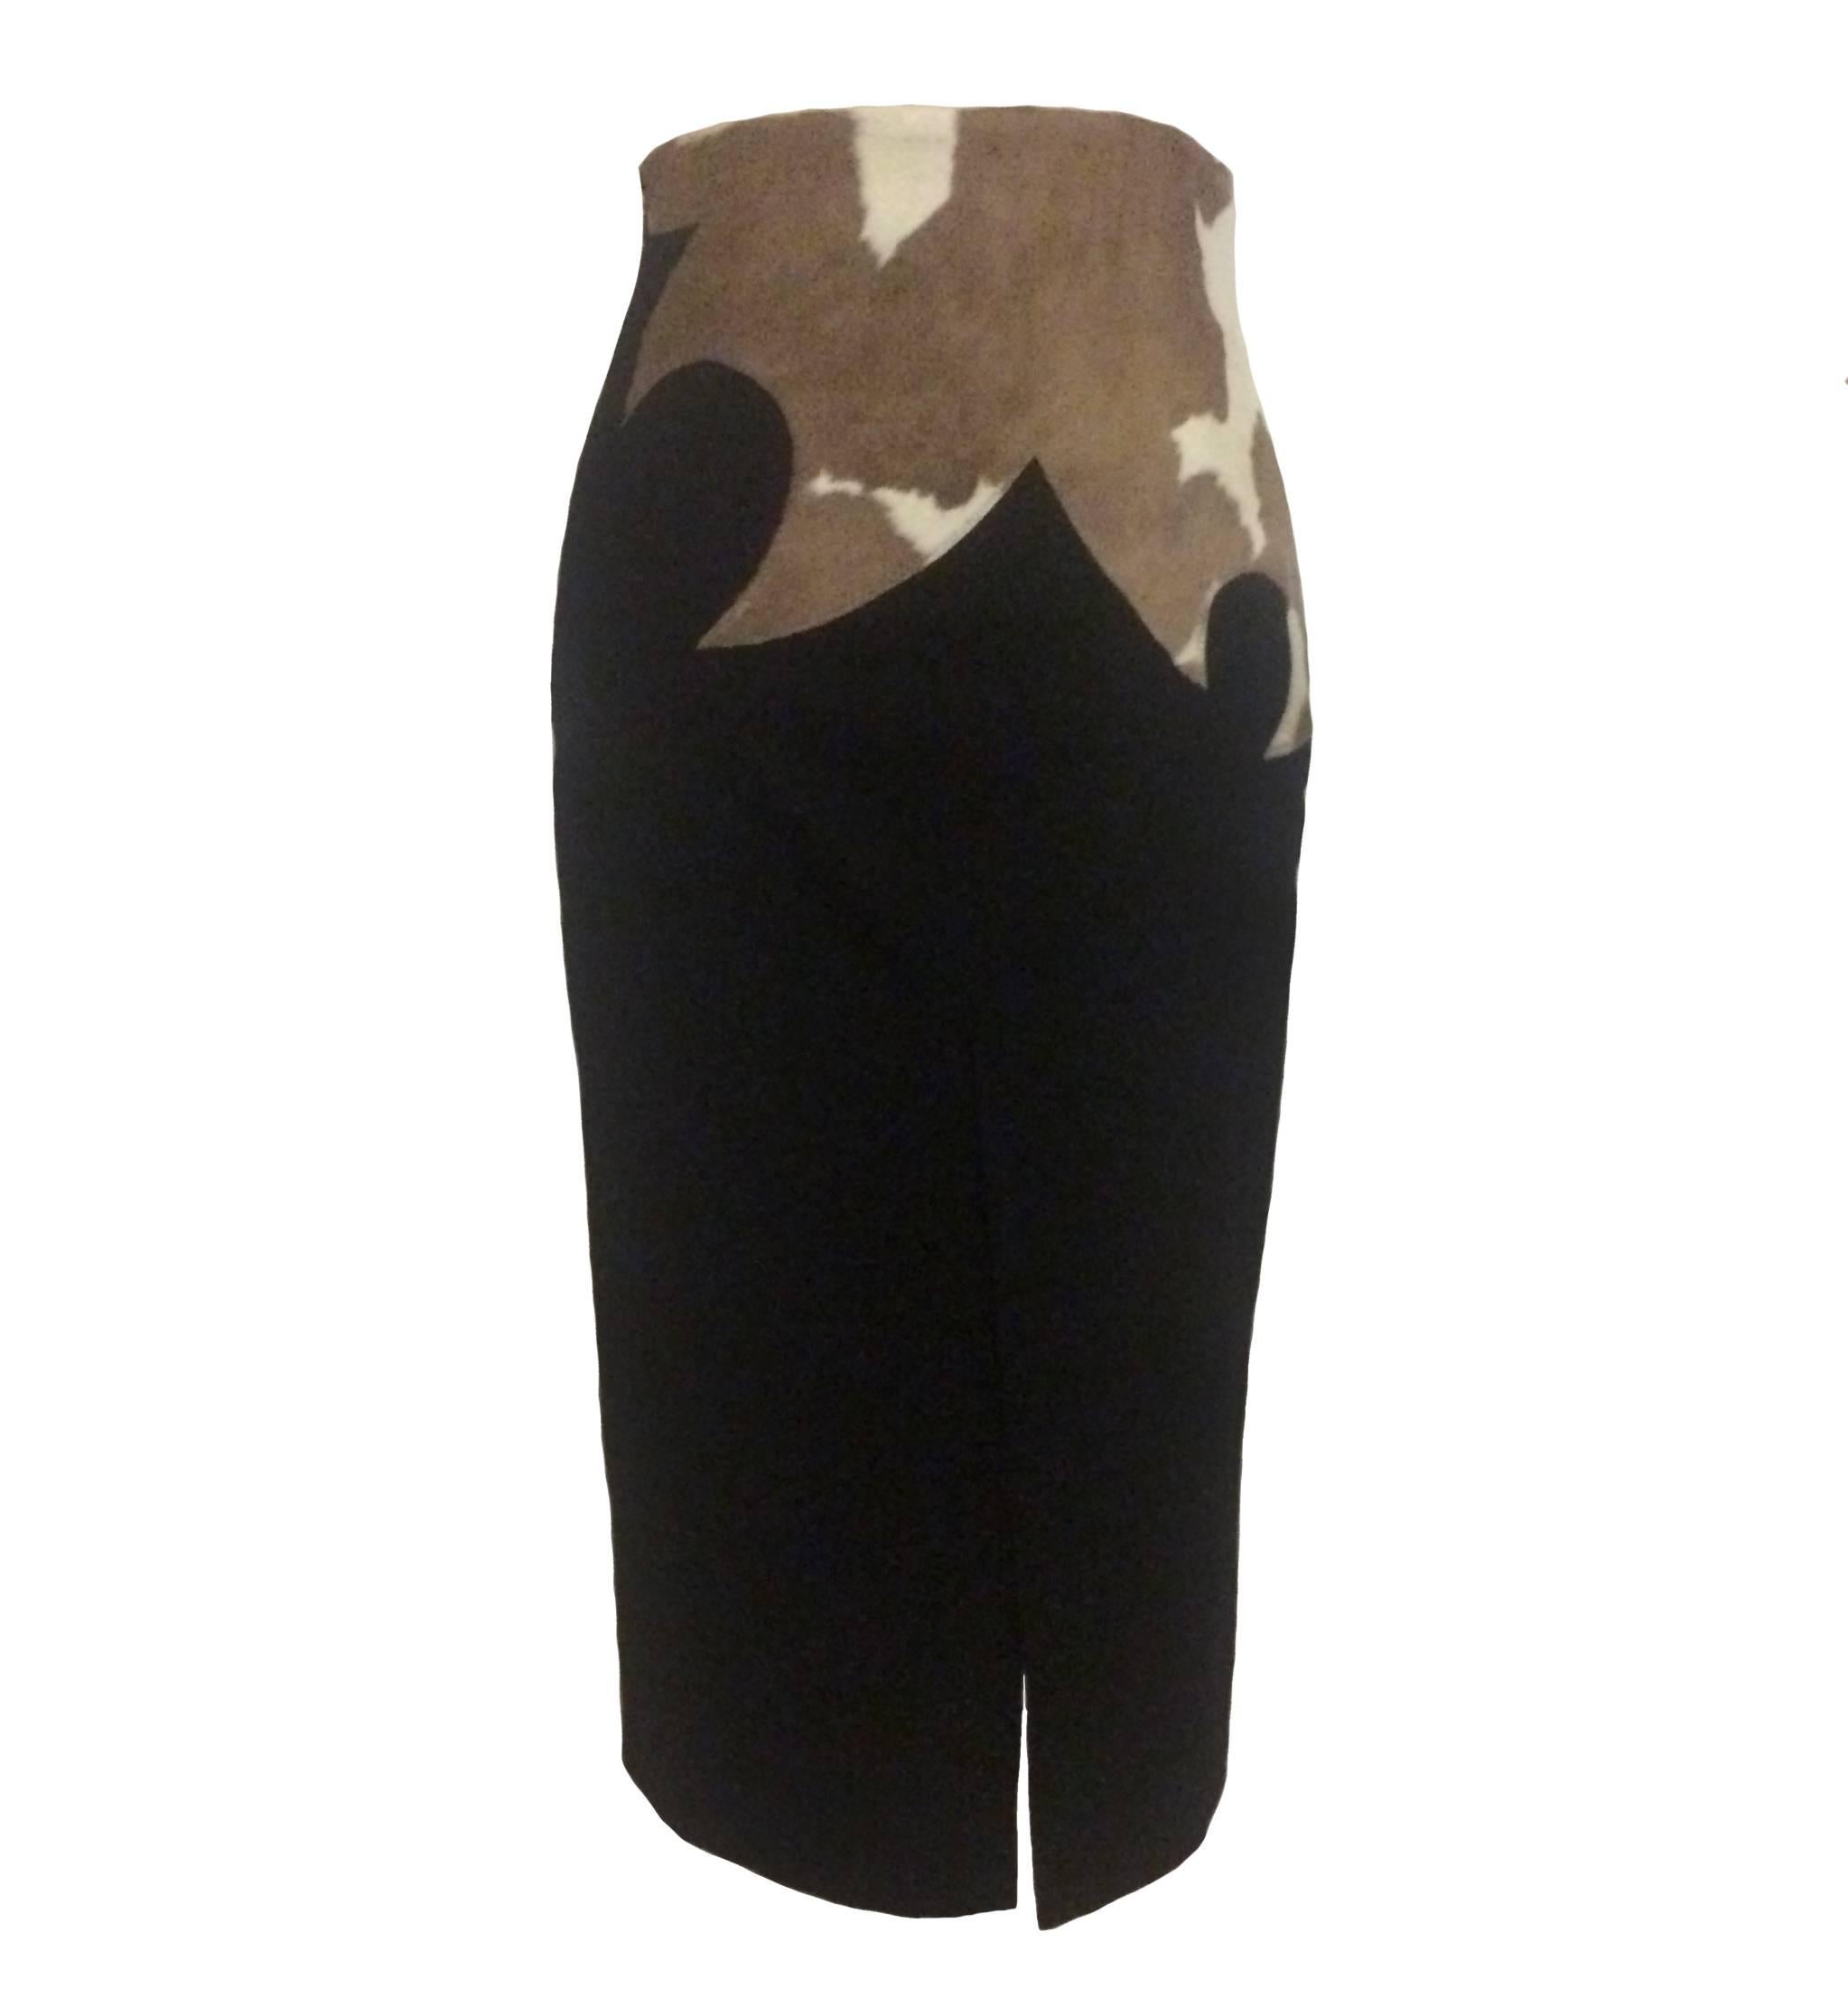 Alexander McQueen black pencil skirt with pony detailing at top. Side zip and hook and eye.

73% wool, 20% polyamide, 7% cashmere.
Leather trim. 
Fully lined.

Made in Italy.

Size IT 44, approximate US 8. Runs small, see